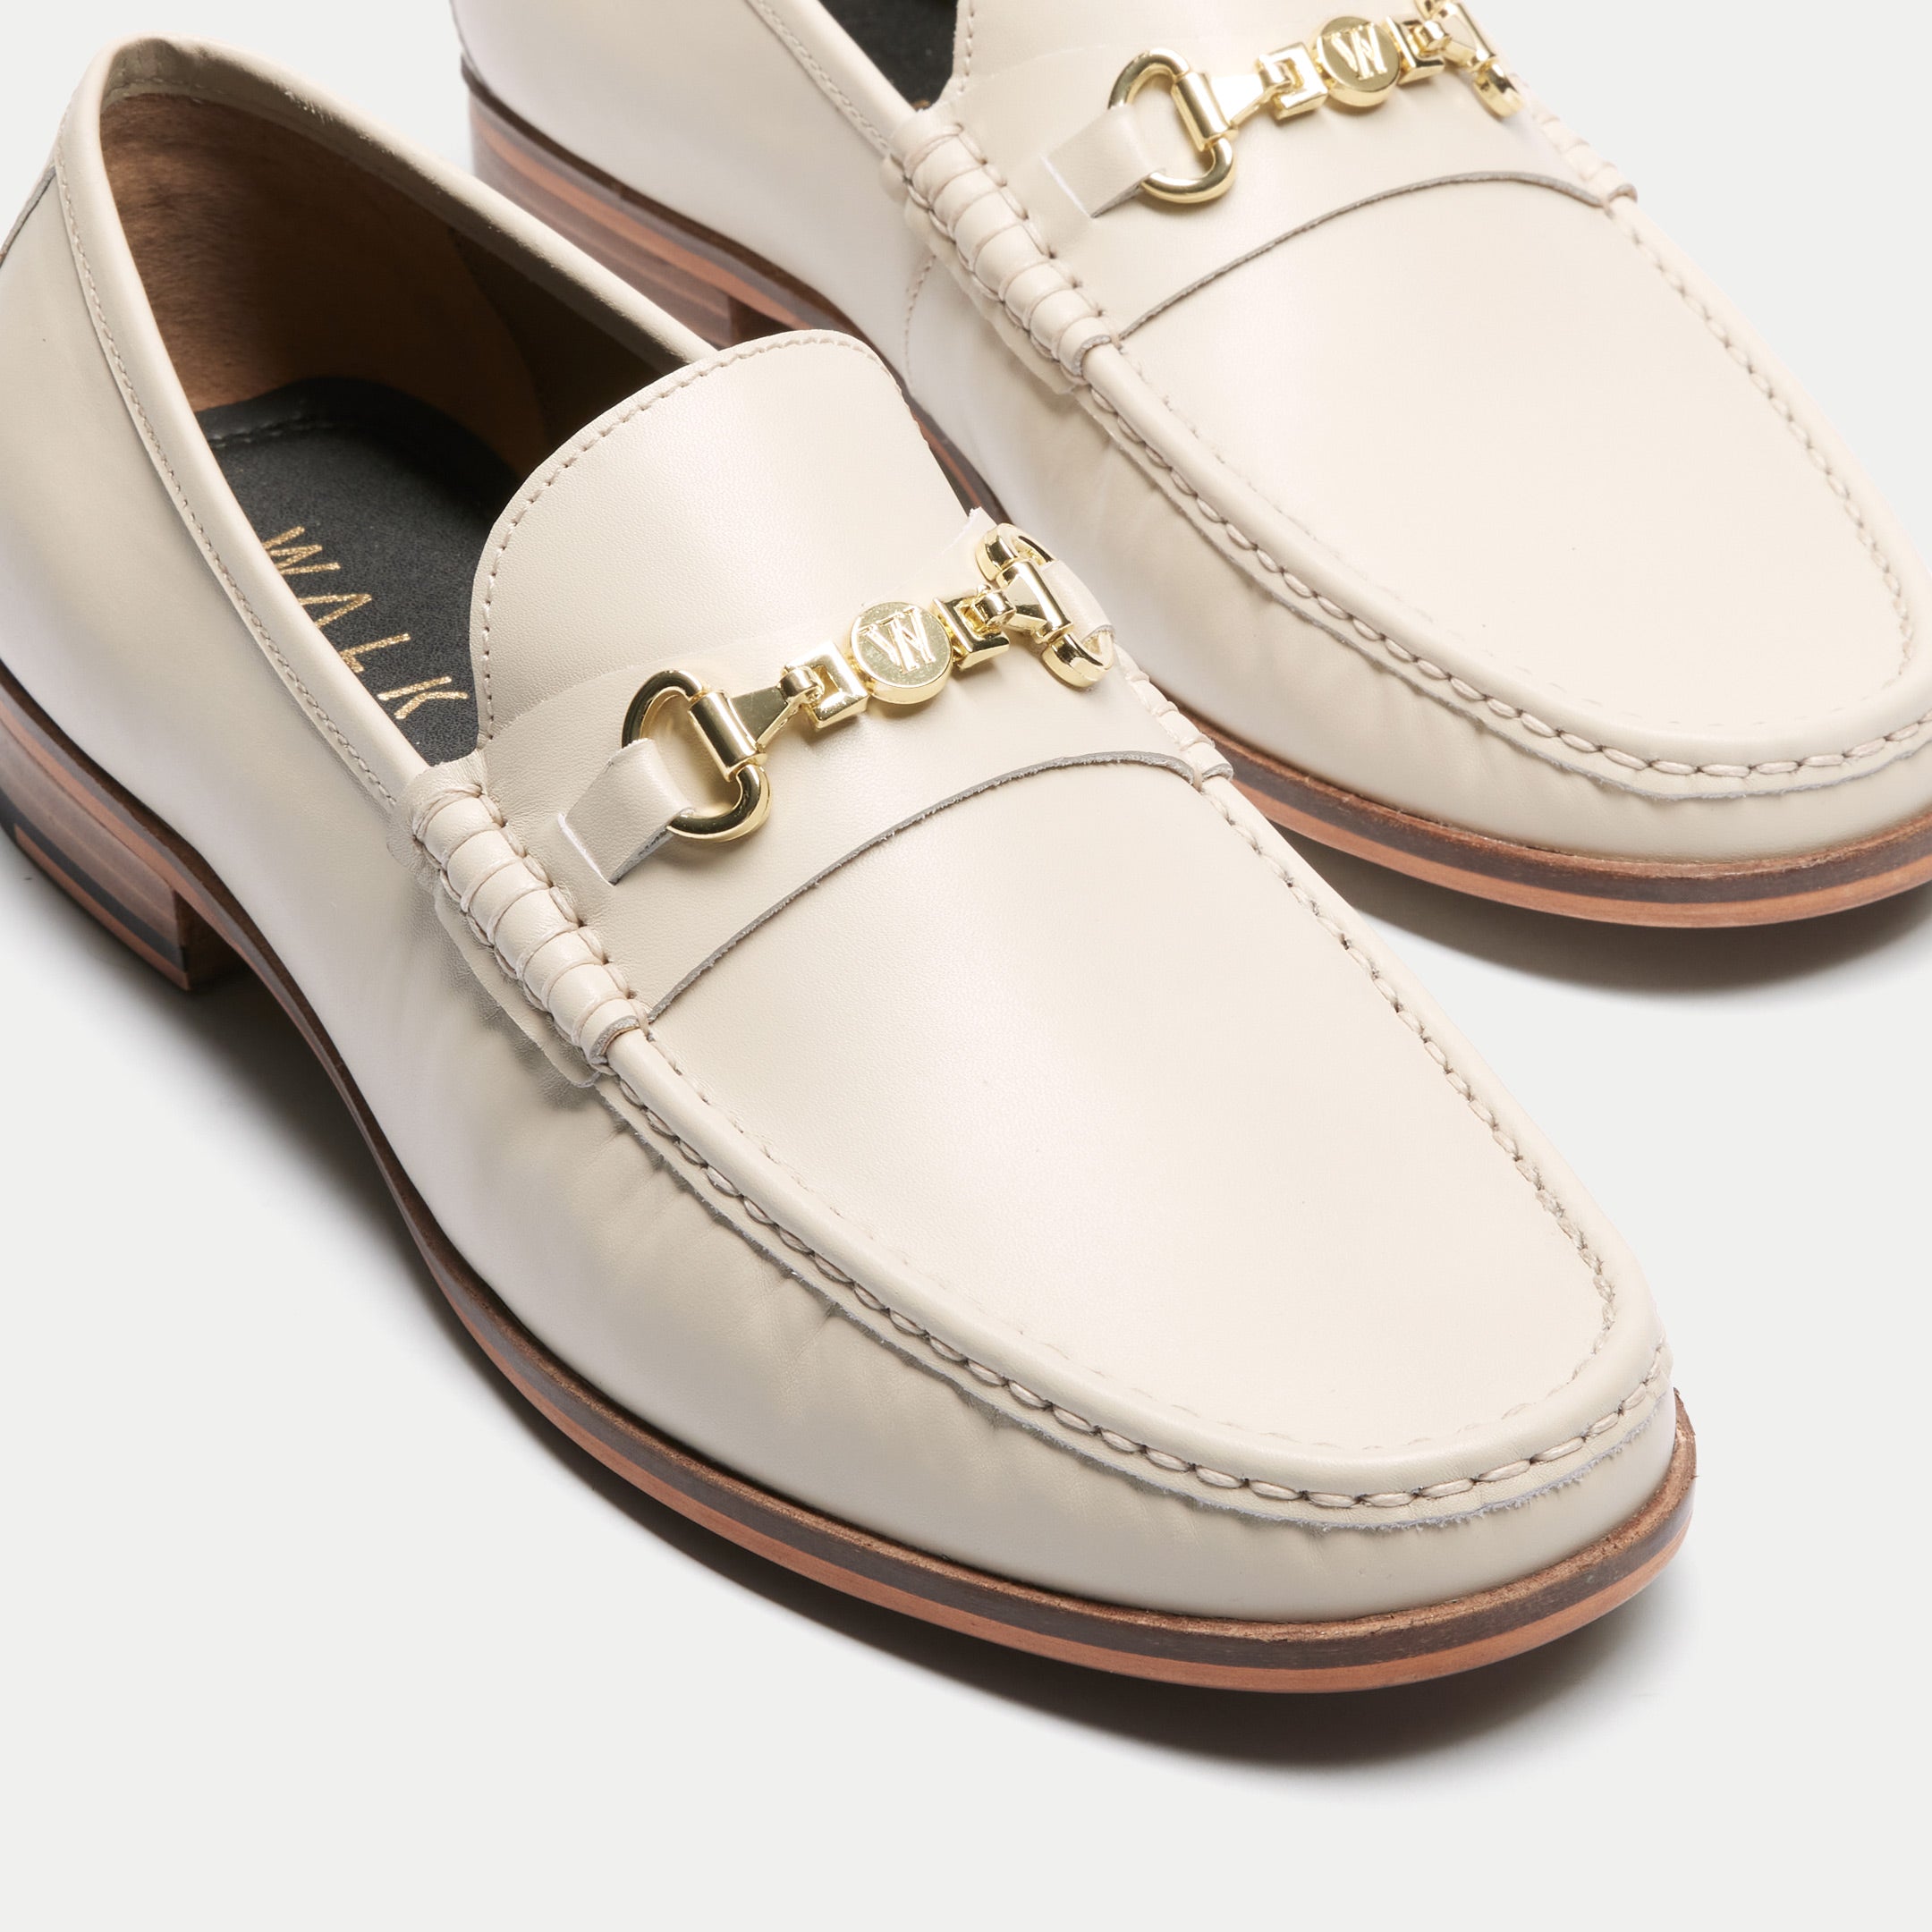 Walk London Mens Tino Trim Loafer in Off White Leather